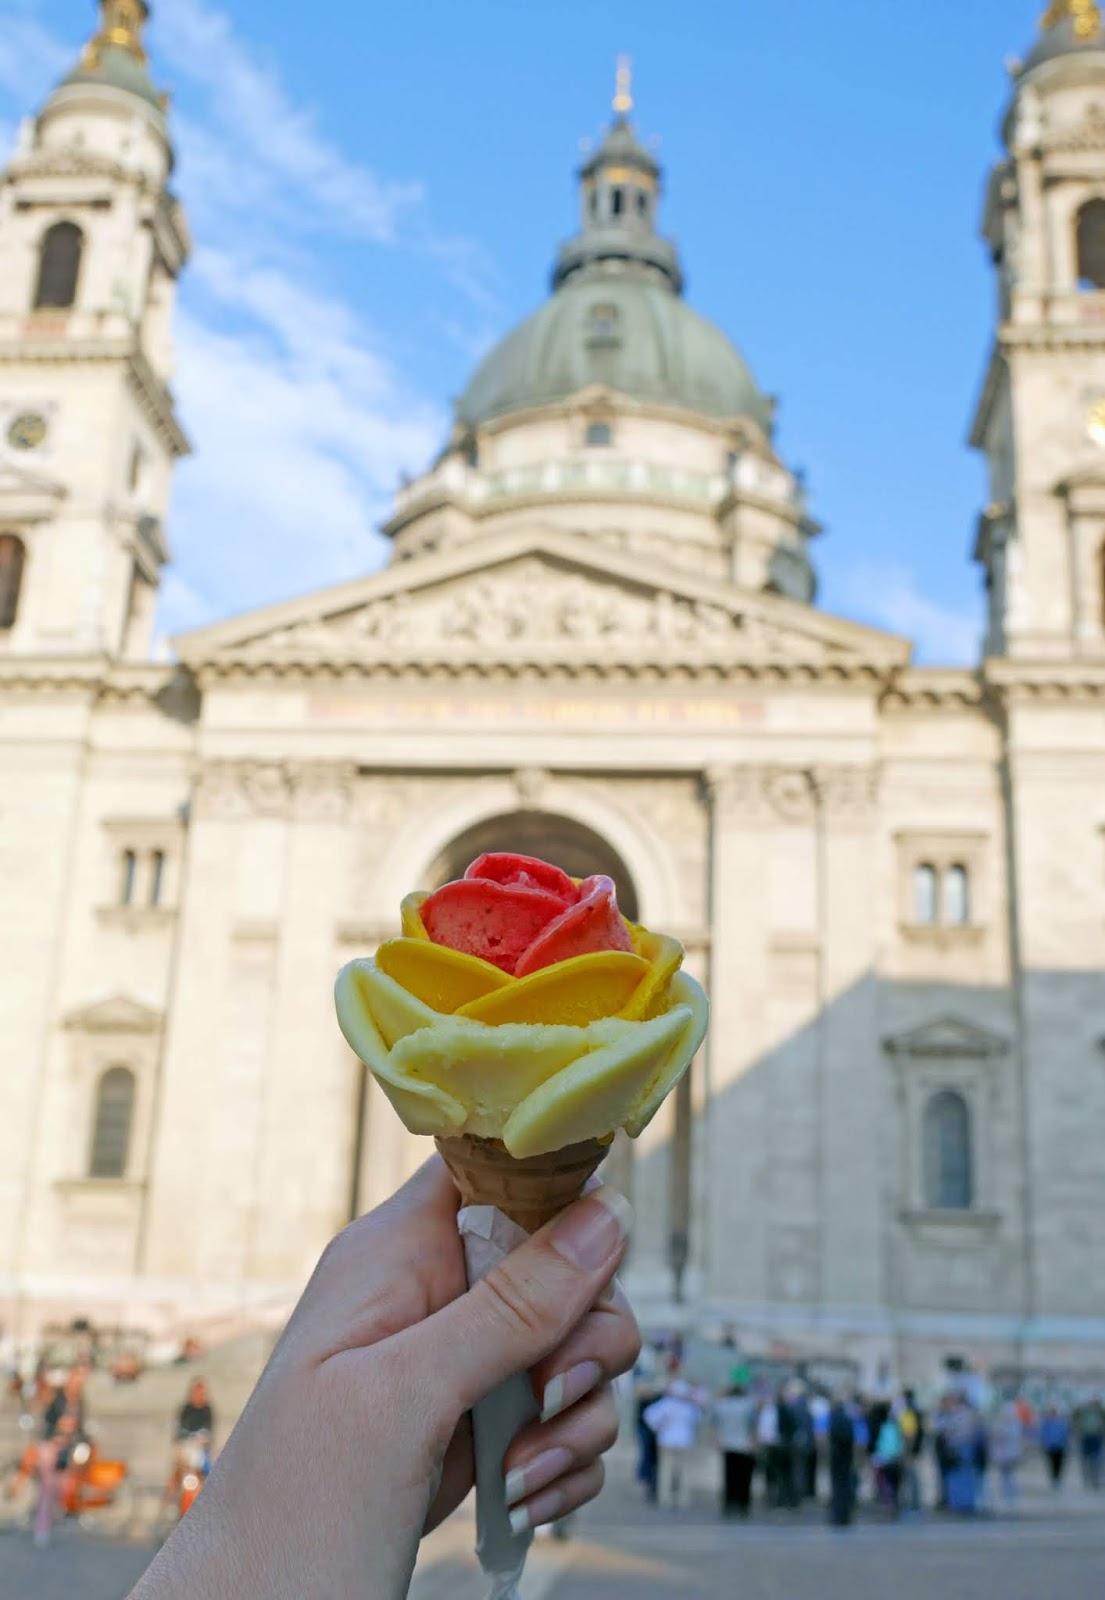 Gelarto Rosa's rose-shaped ice cream in front of the St Stephen's Basilica, Budapest